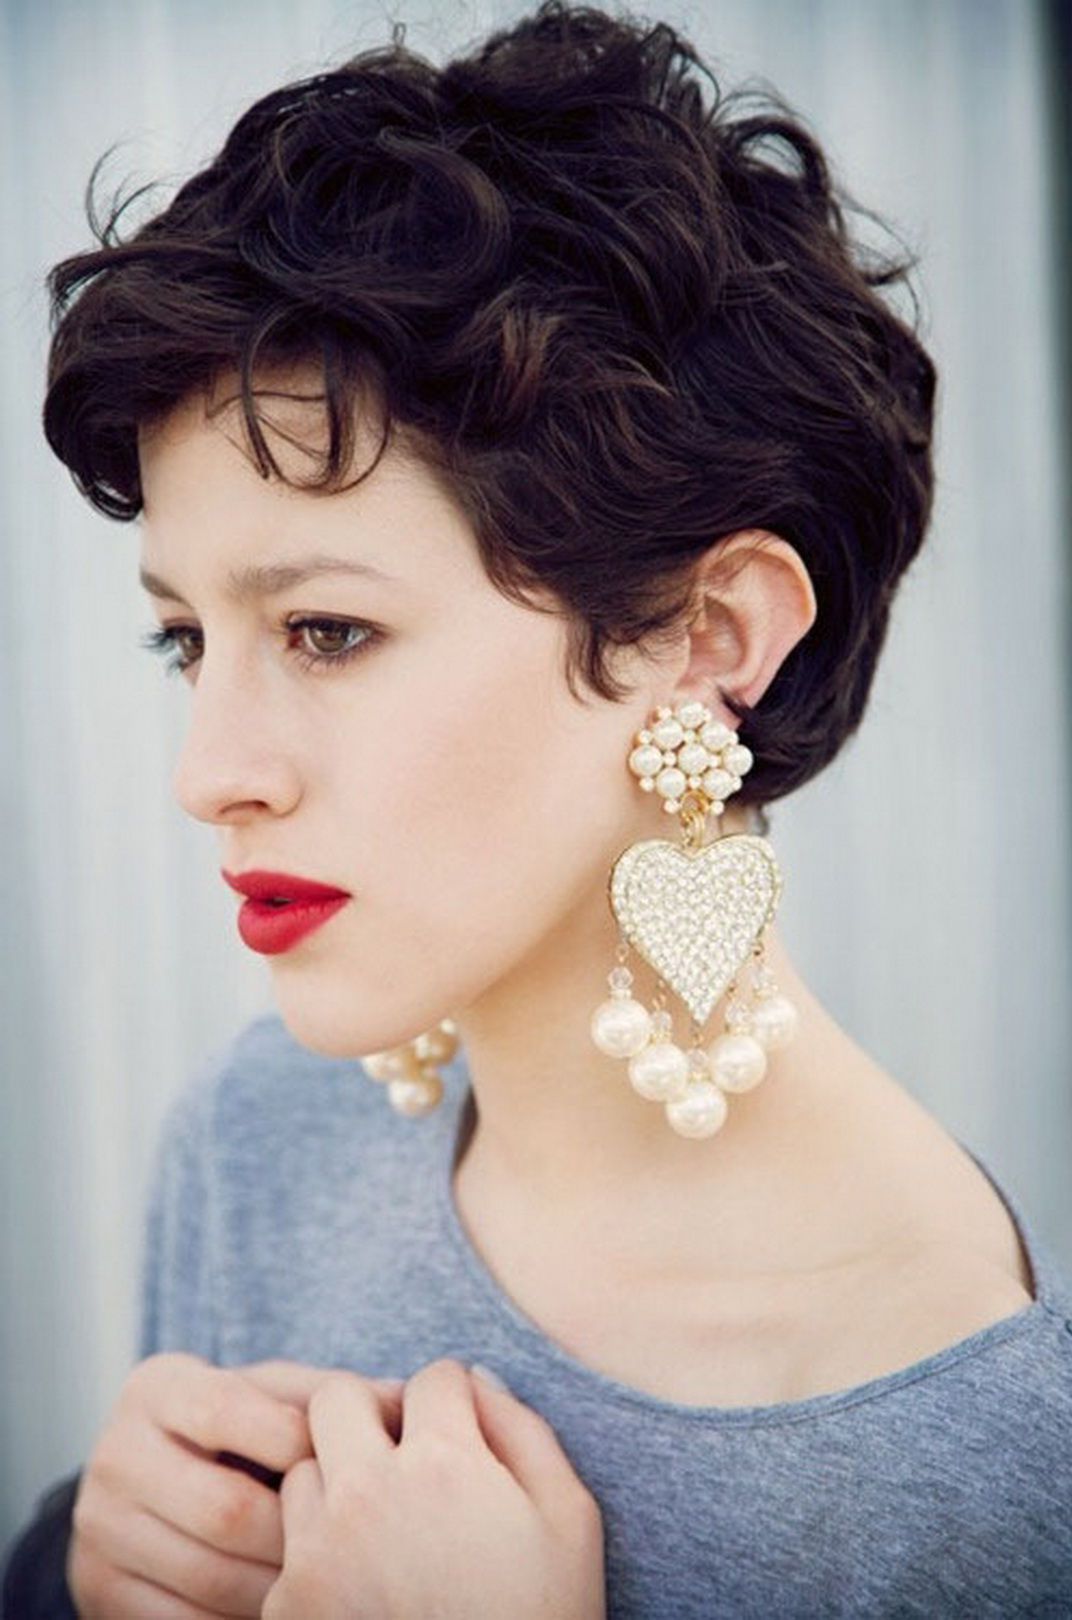 Short Hairstyles Thick Hair Round Face : Haircuts Styles And Within Thick Curly Short Haircuts (Photo 1 of 25)